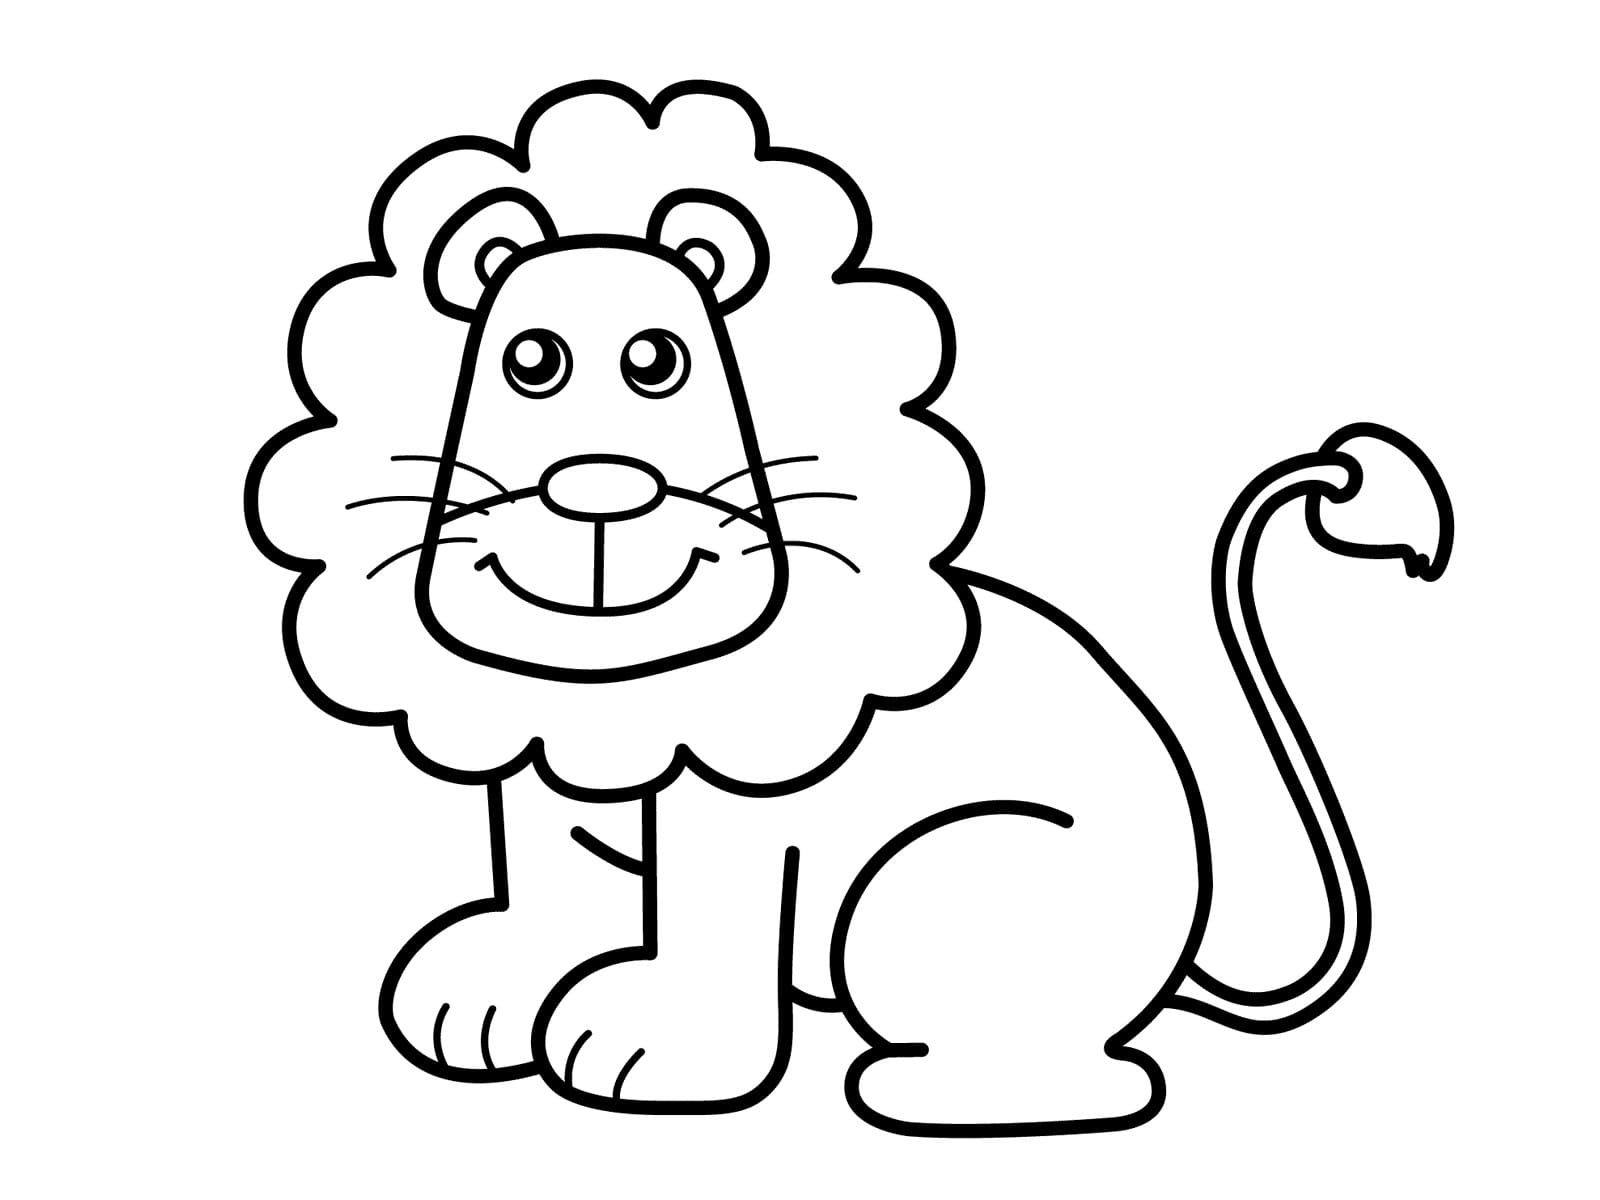 Coloring pages for kids 5 years. Print for free, 100 pictures